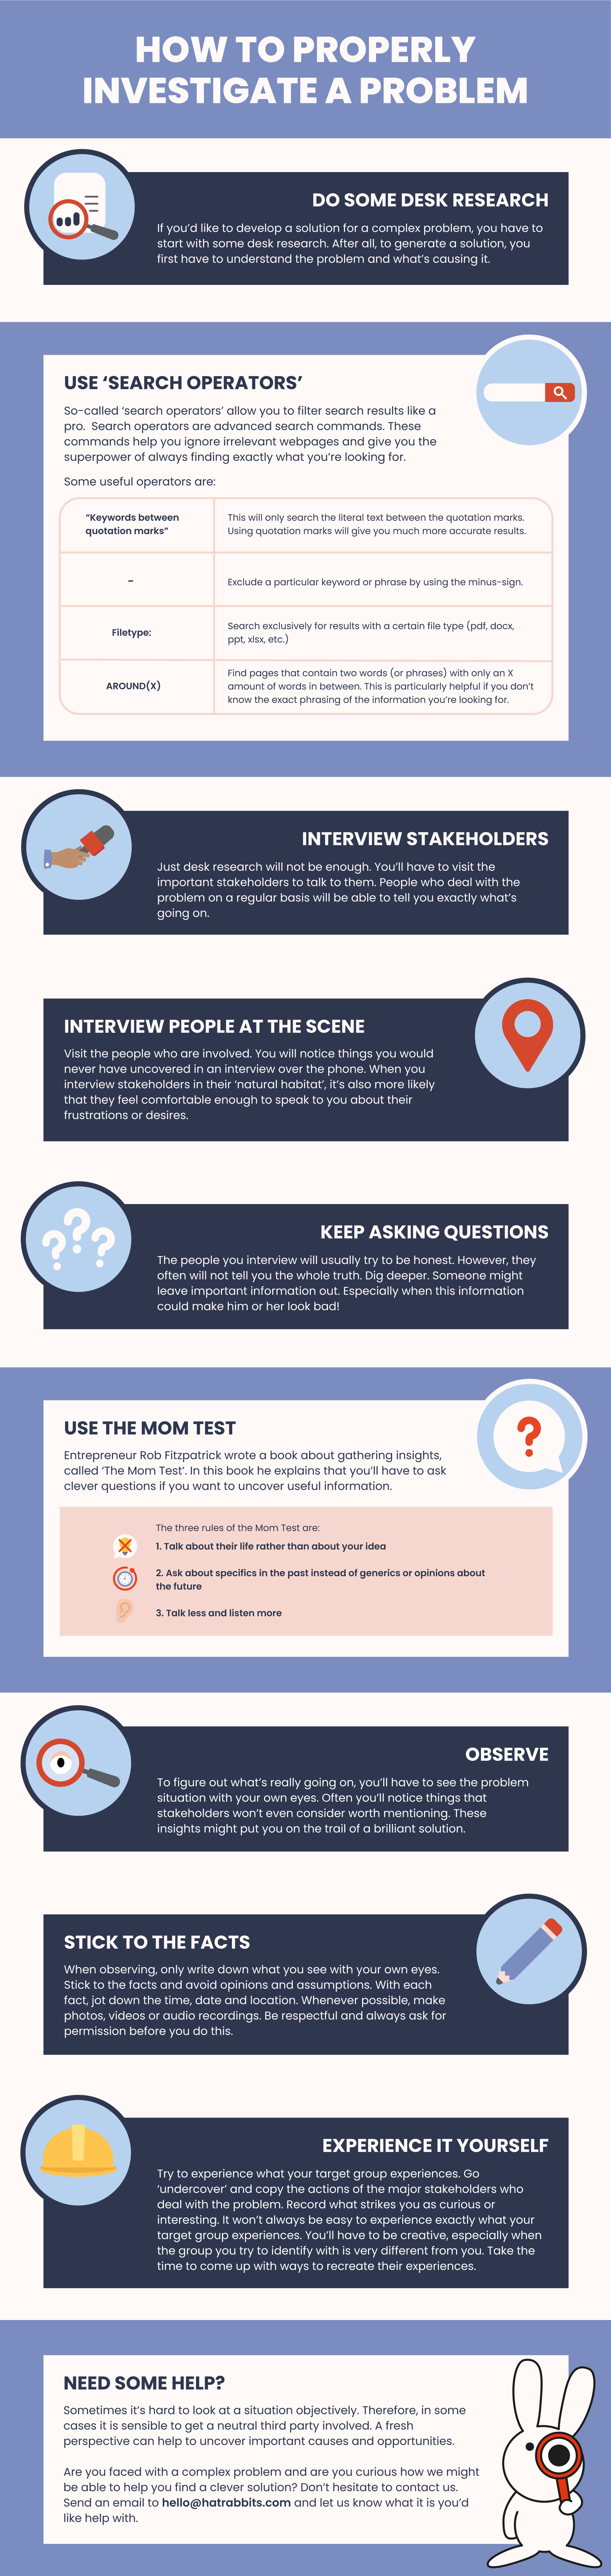 infographic - How to investigate a problem